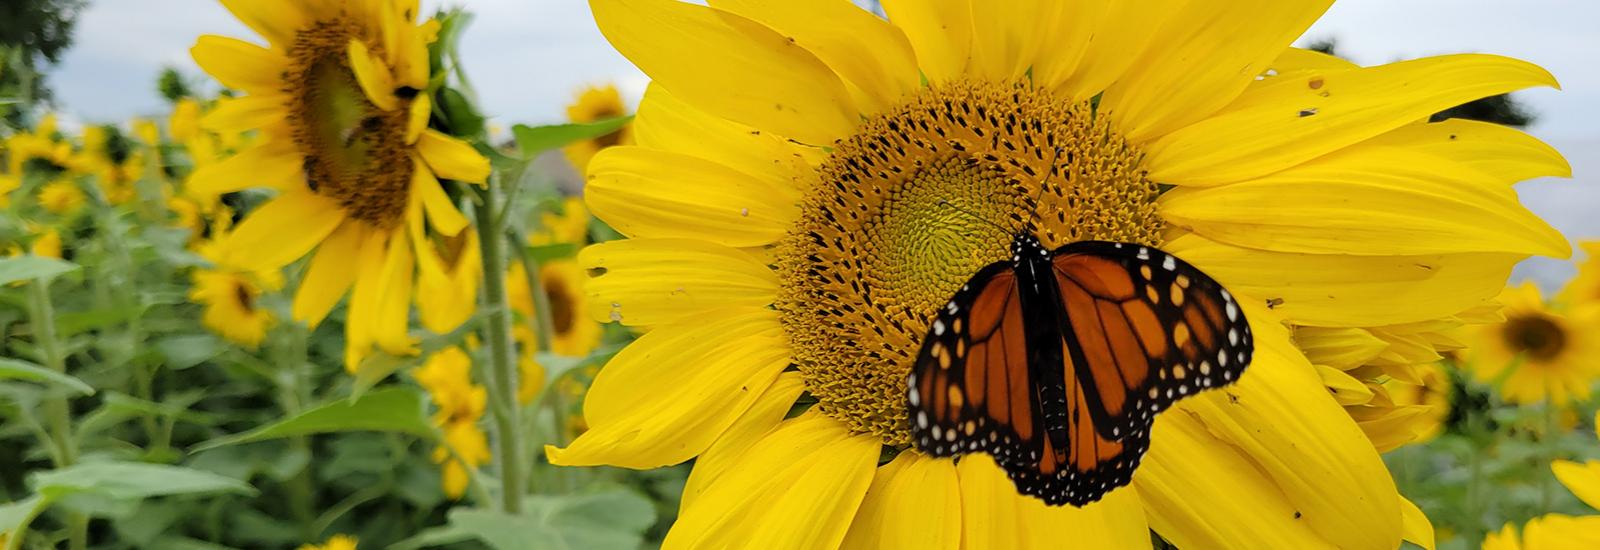 Sunflower with Monarch butterfly 